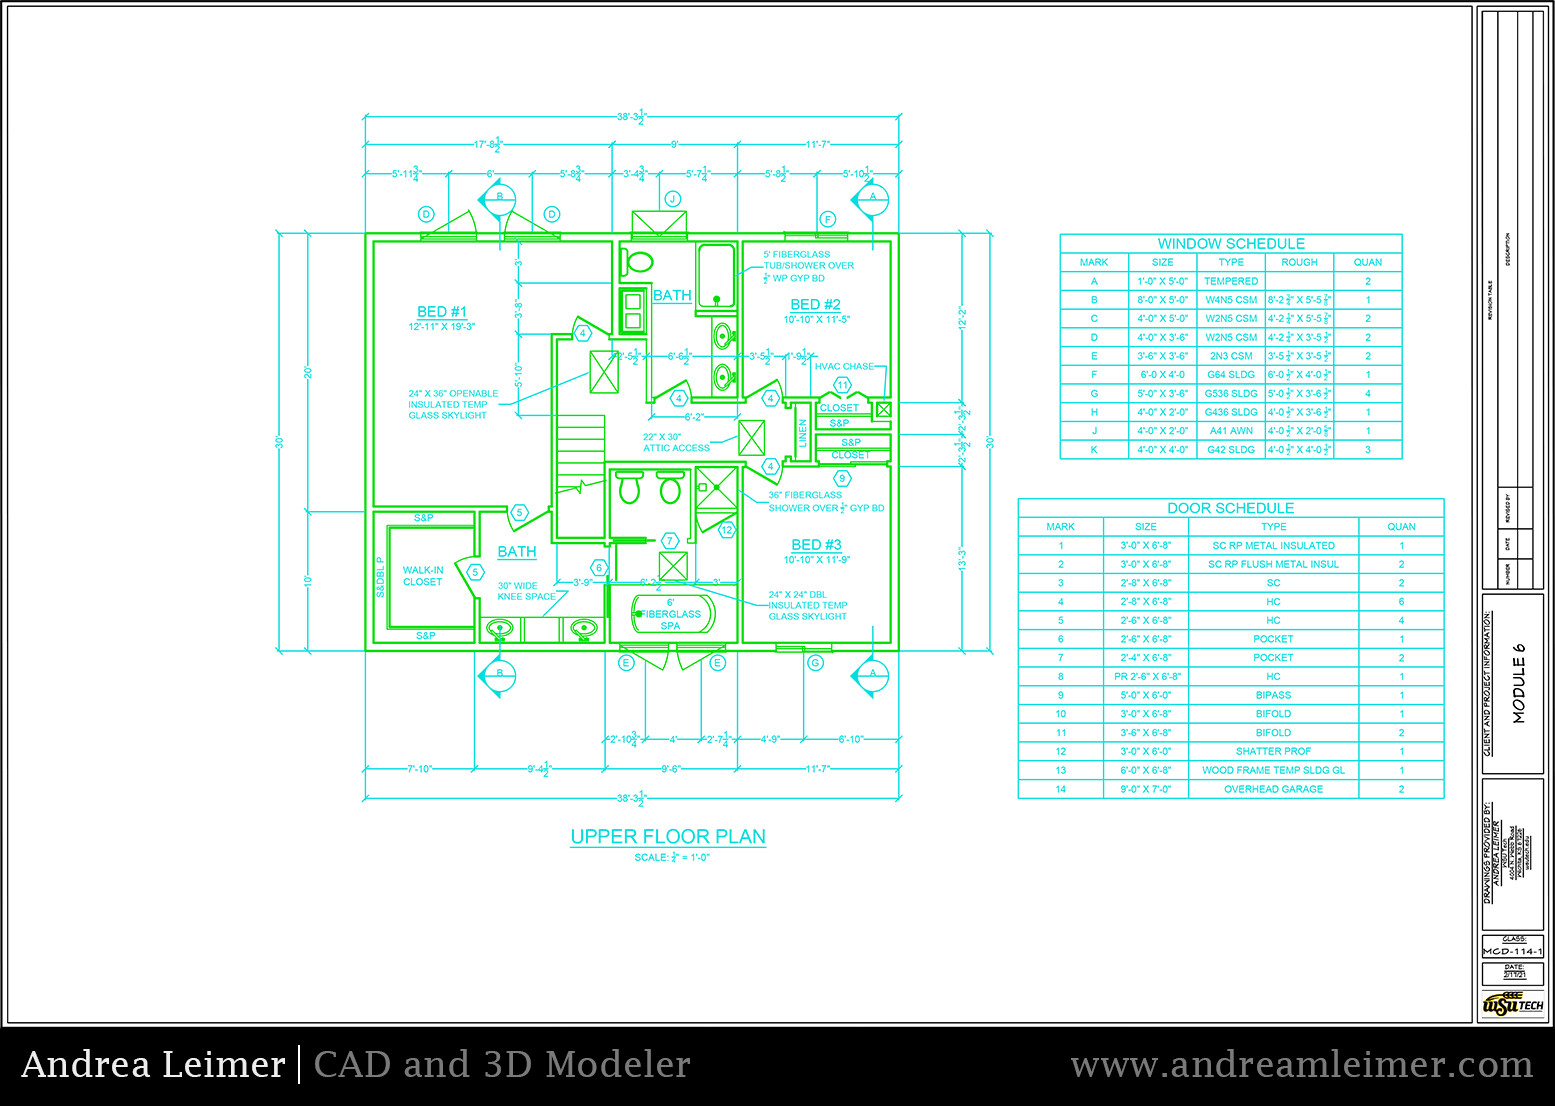 Second Floor Blueprint with dimensions, furniture, and schedules.